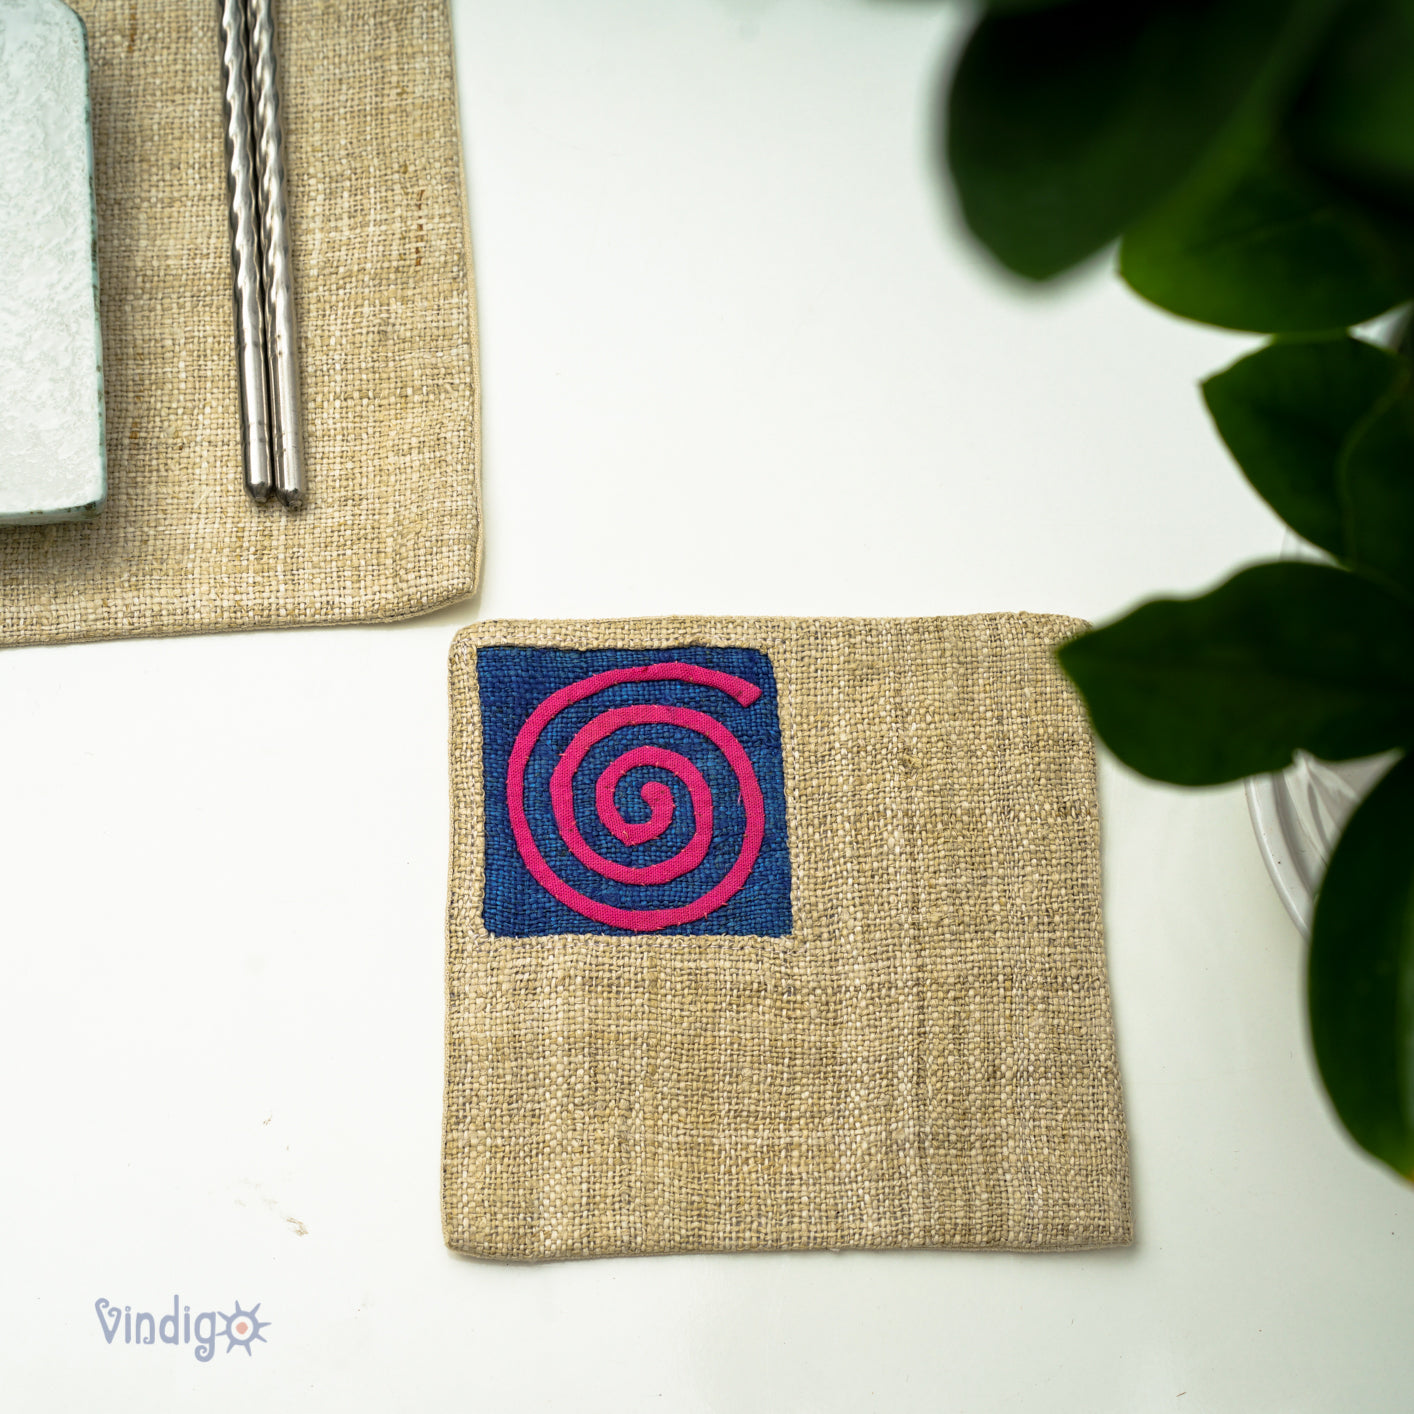 Beige Hemp coaster with embroidered patch